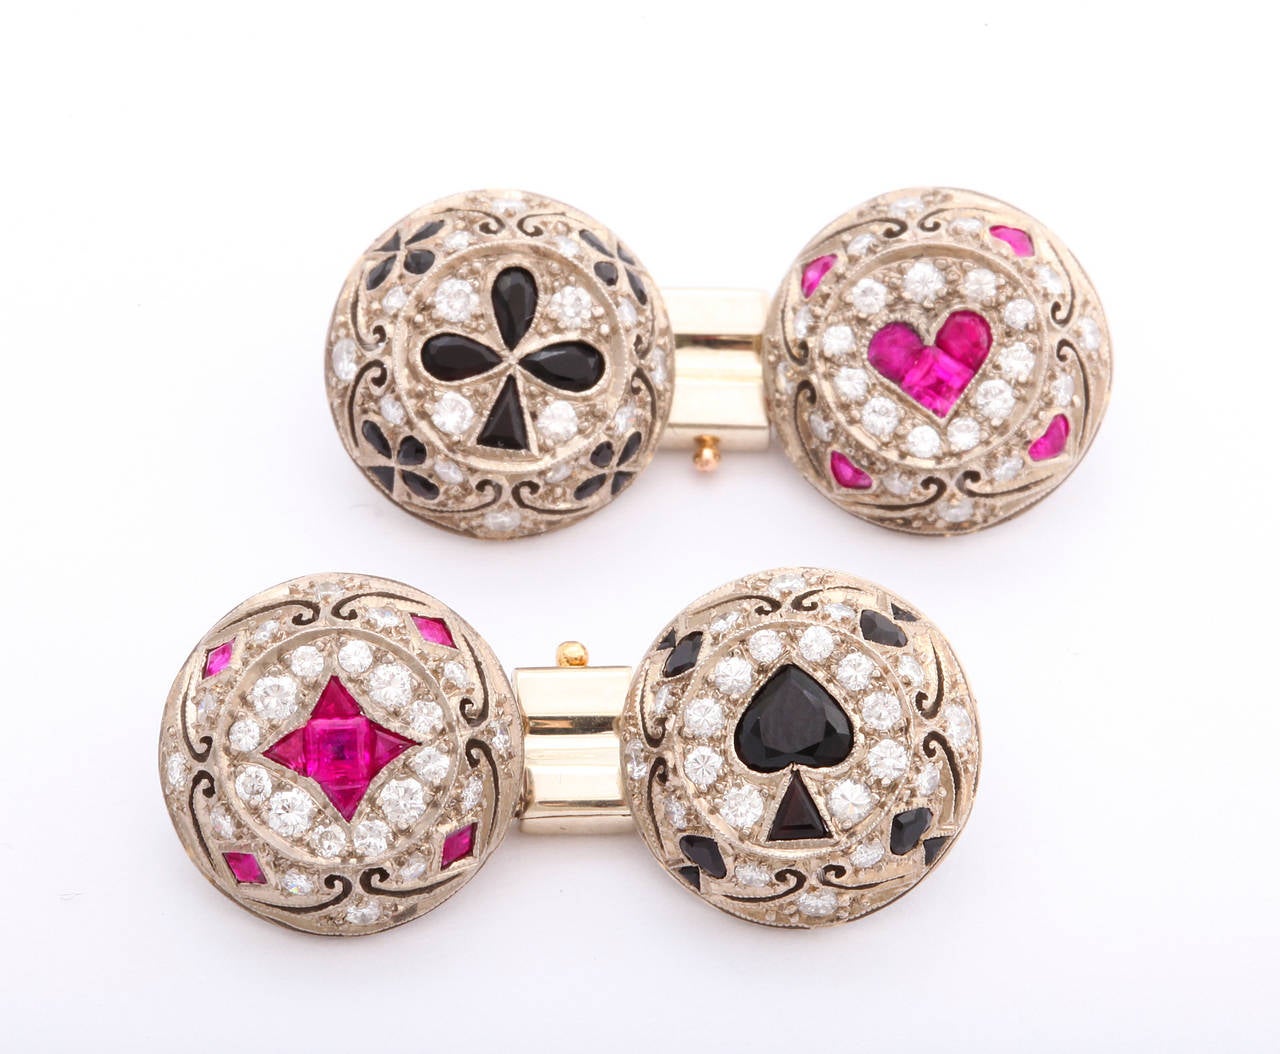 This playful late 20th century cufflink and four-stud dress set by renown jewelry designer Lucy Campbell of London, has the art deco look of the 1920s, featuring rubies and onyx set in 18K white gold surrounded in diamonds, making up the four card